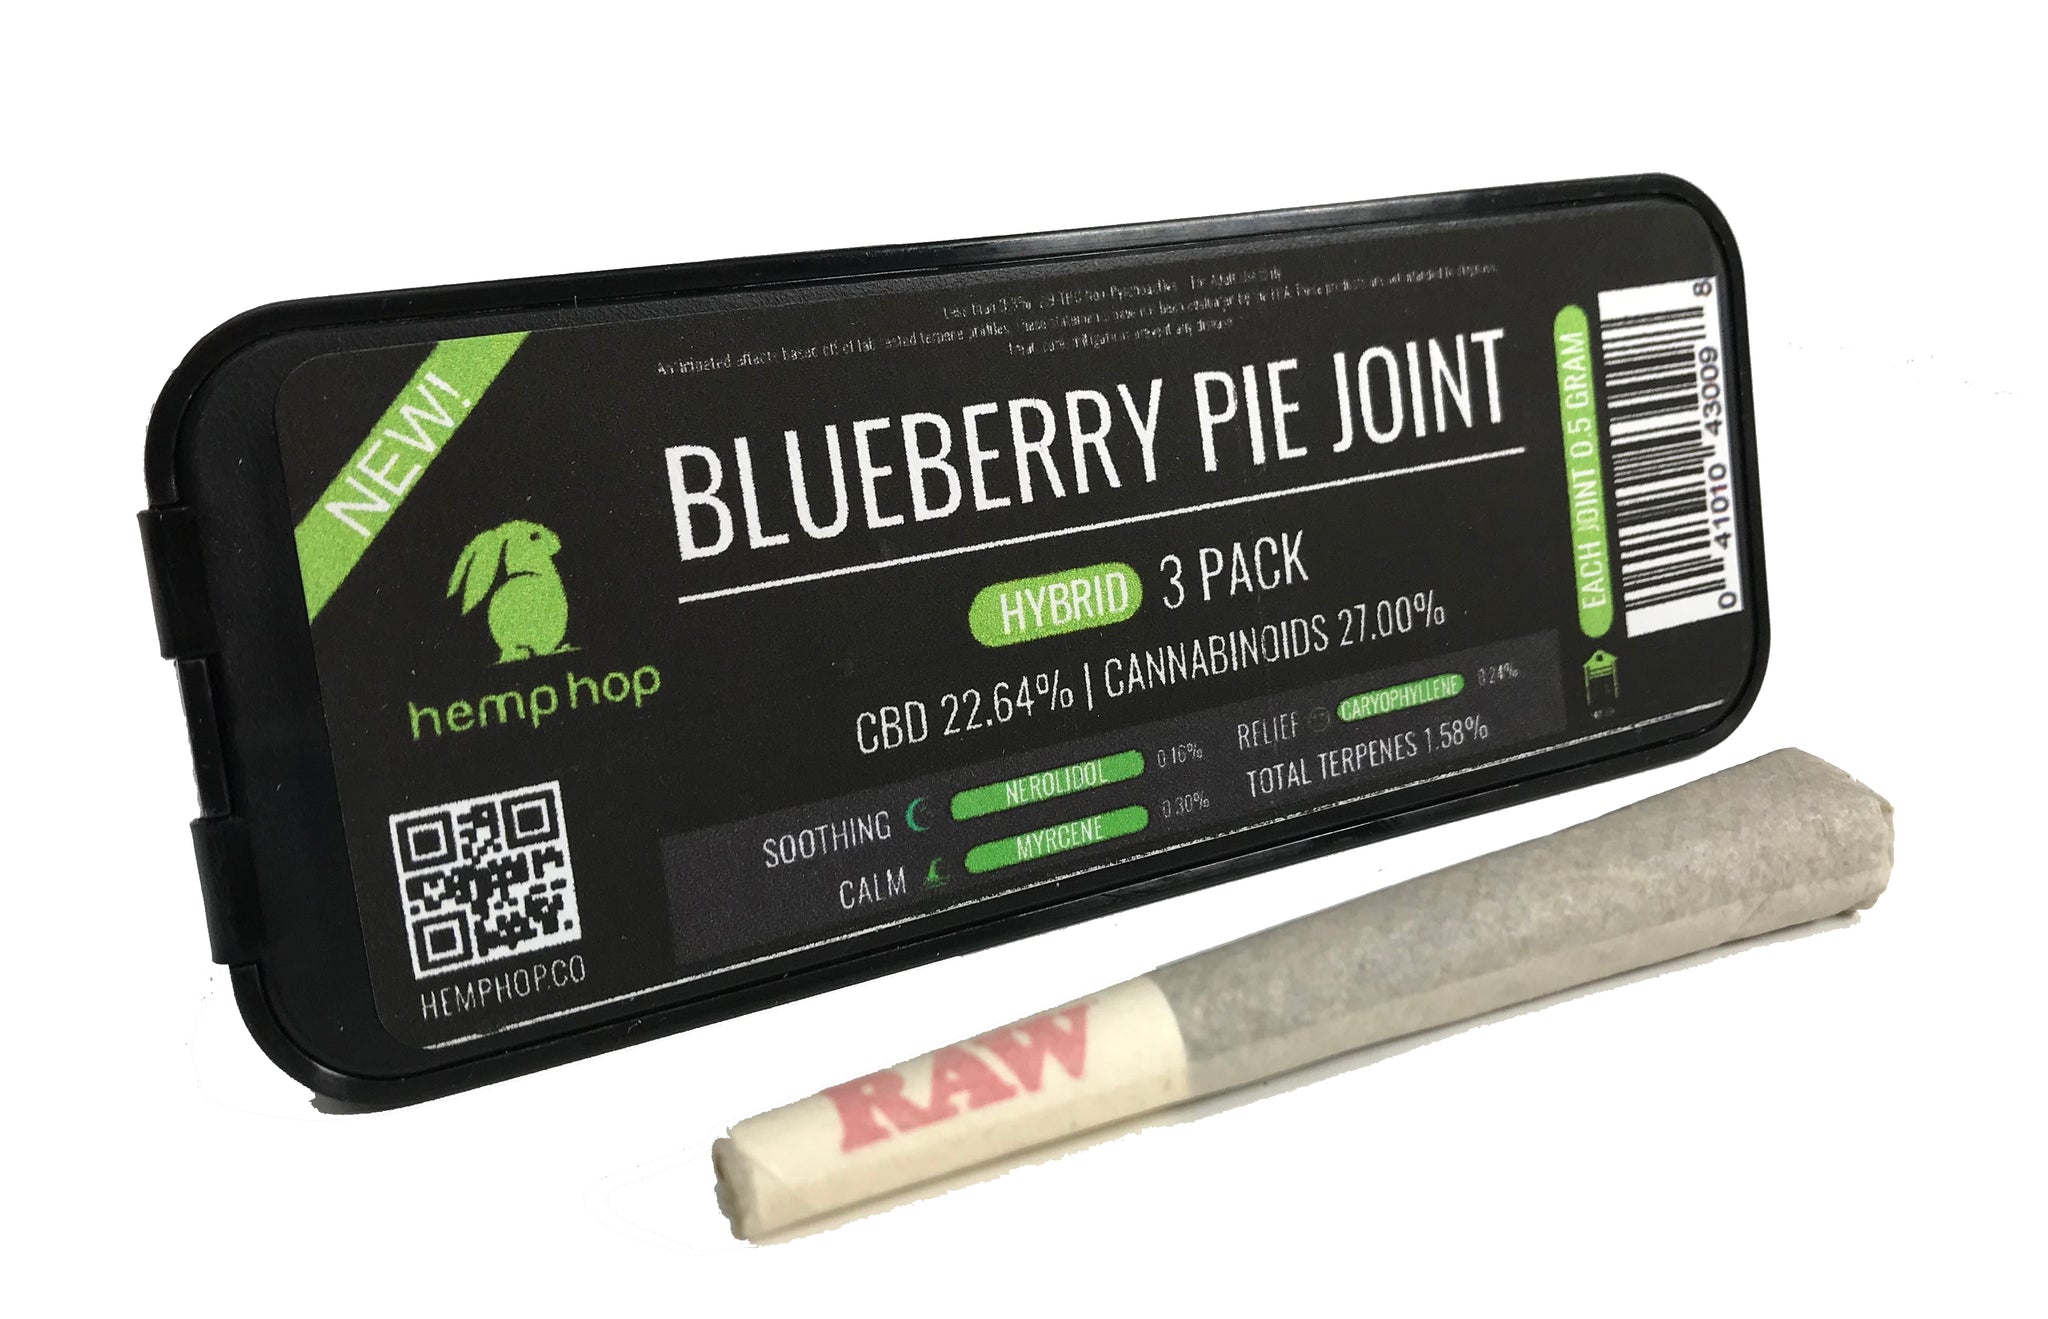 Blueberry Pie Joints 3 Pack